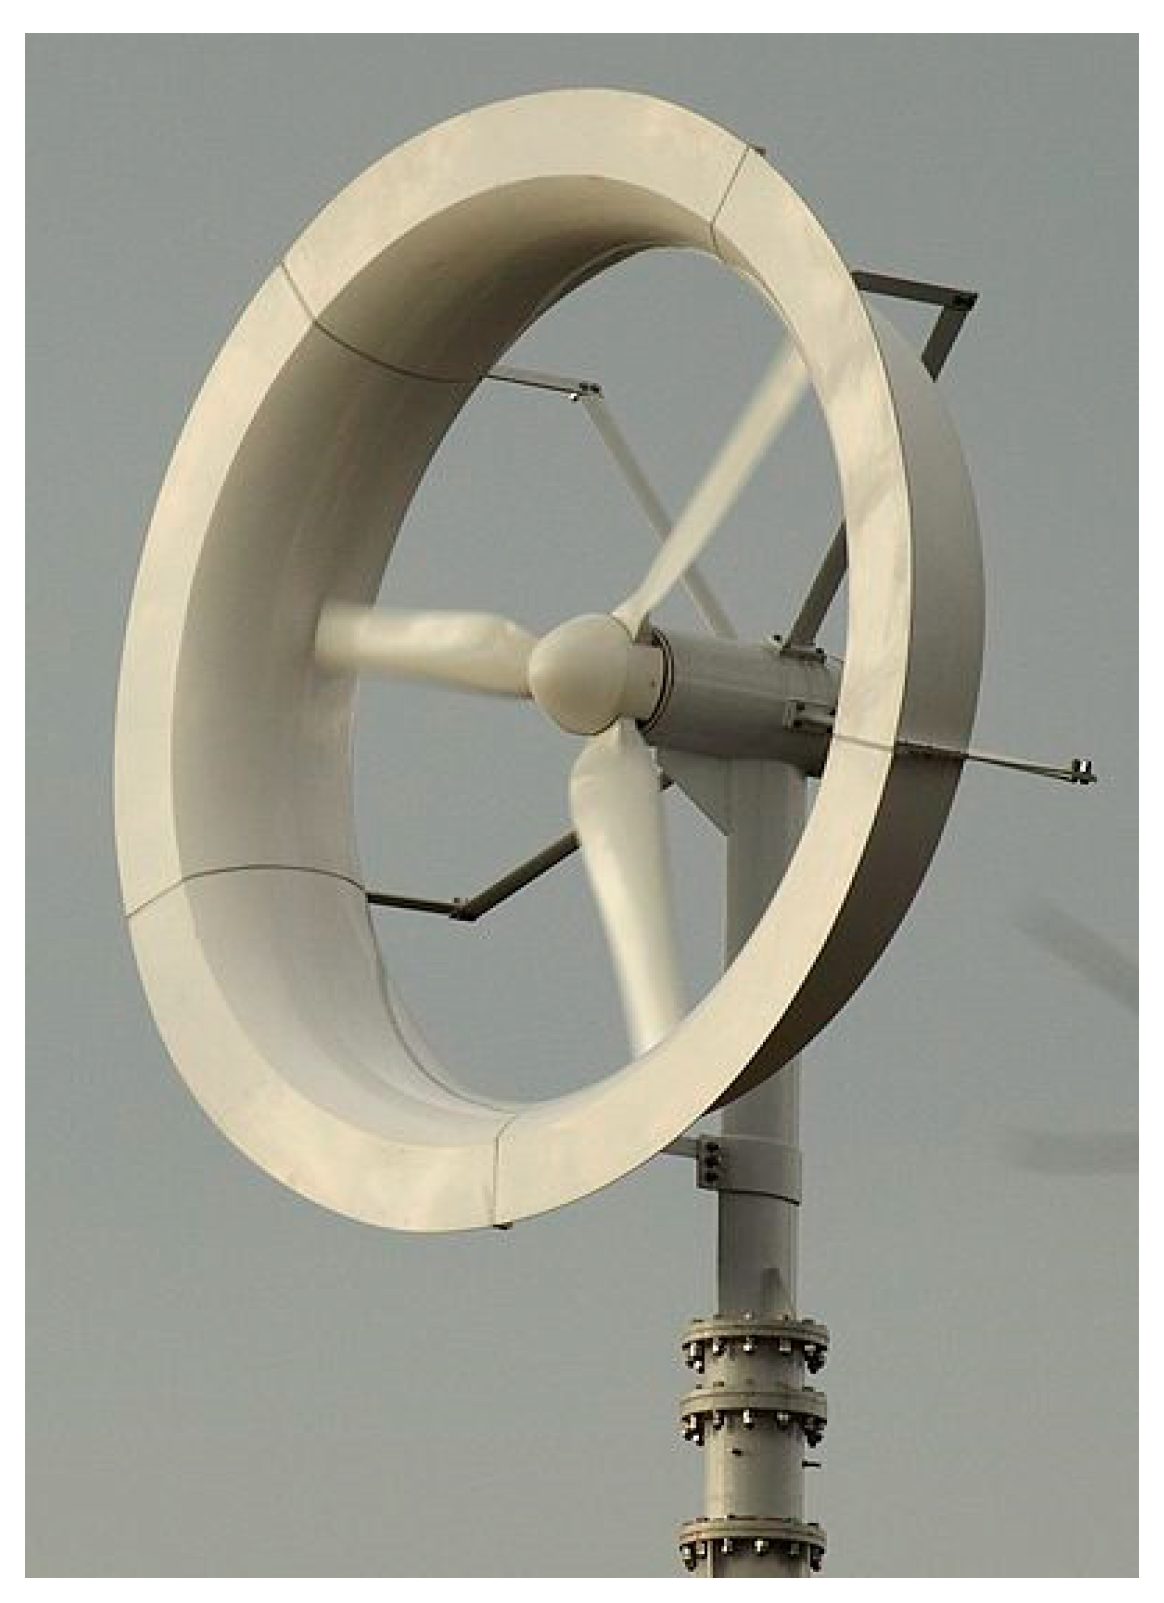 Wind Turbine 0.5 kw For 2.6 Ms Wind Speed at Rs 48000, Chennai